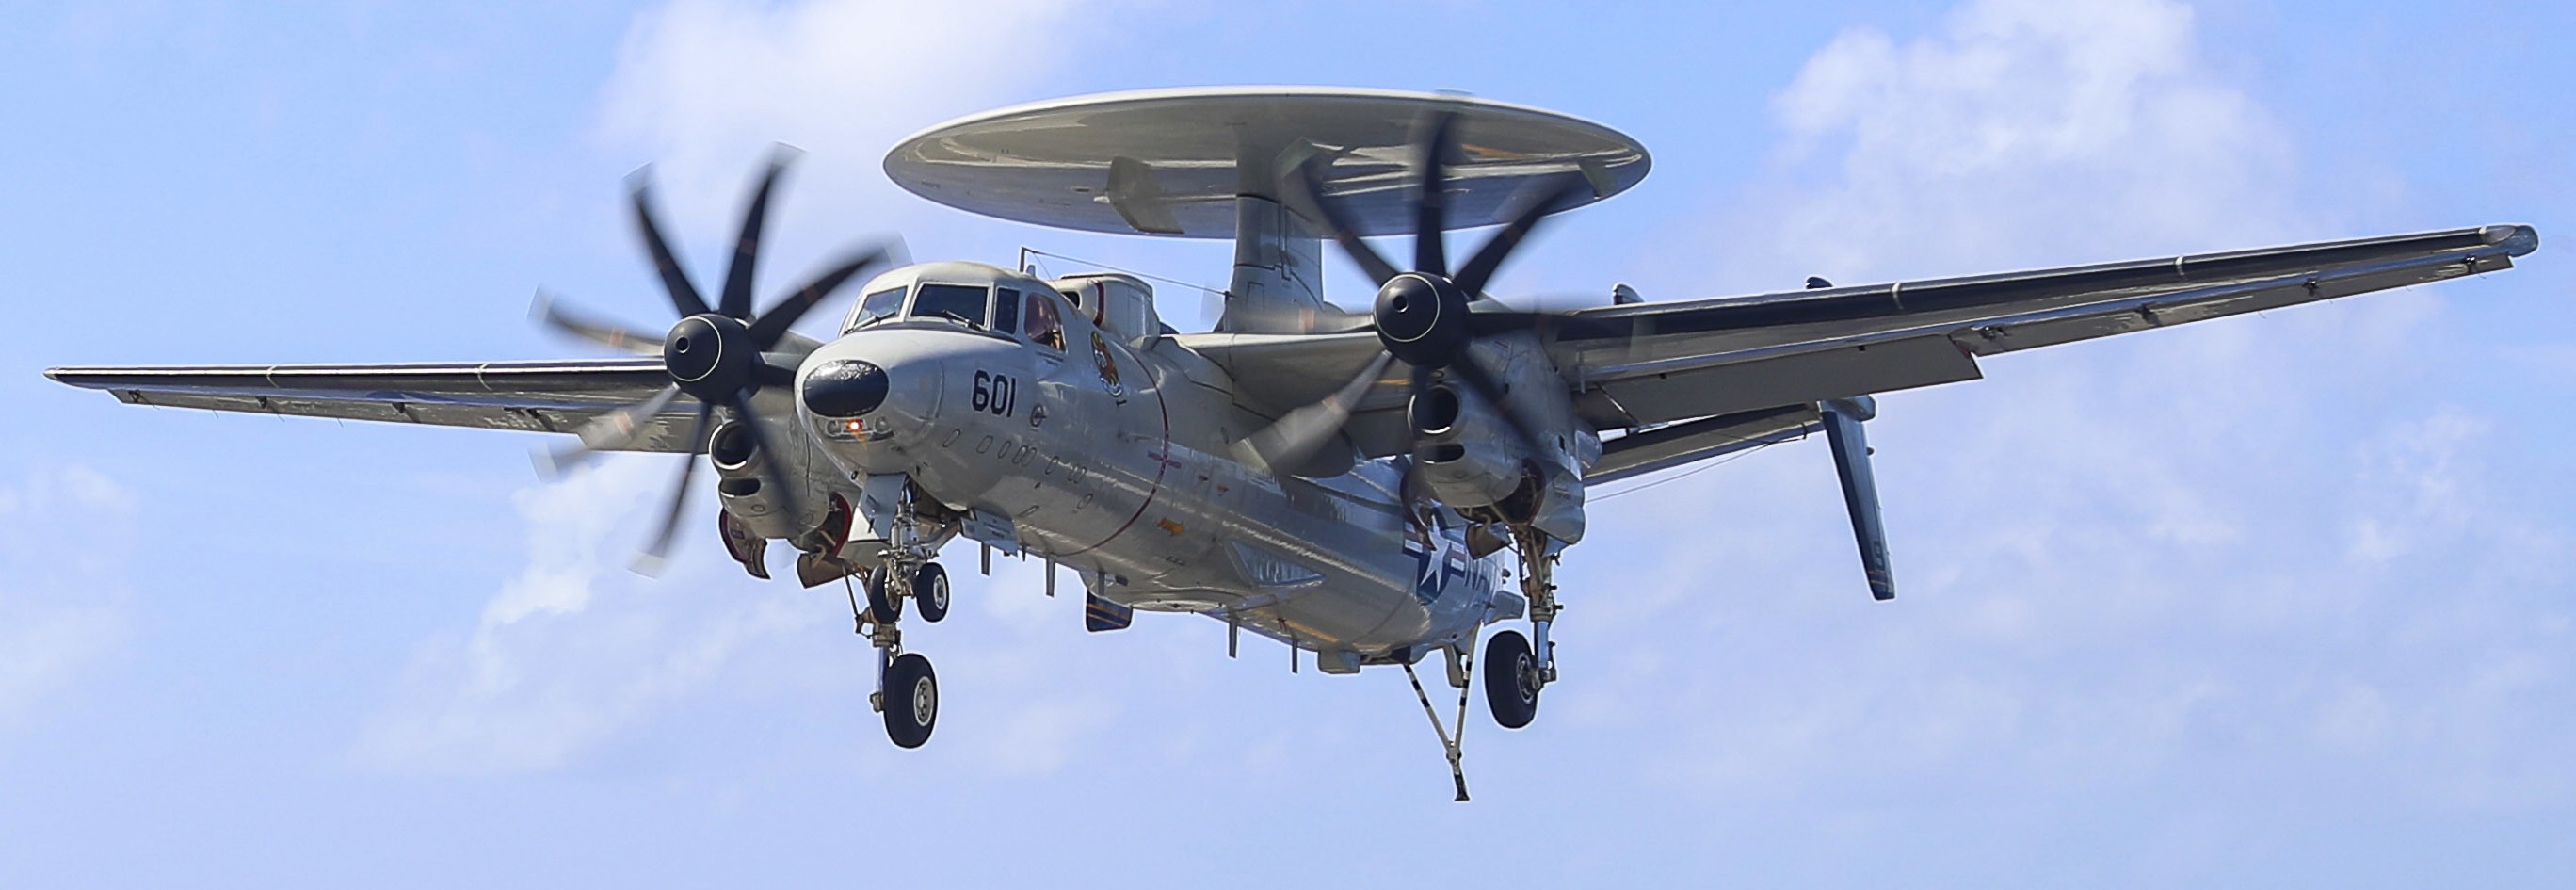 vaw-117 wallbangers airborne command and control squadron navy e-2d hawkeye cvw-9 uss abraham lincoln cvn-72 17